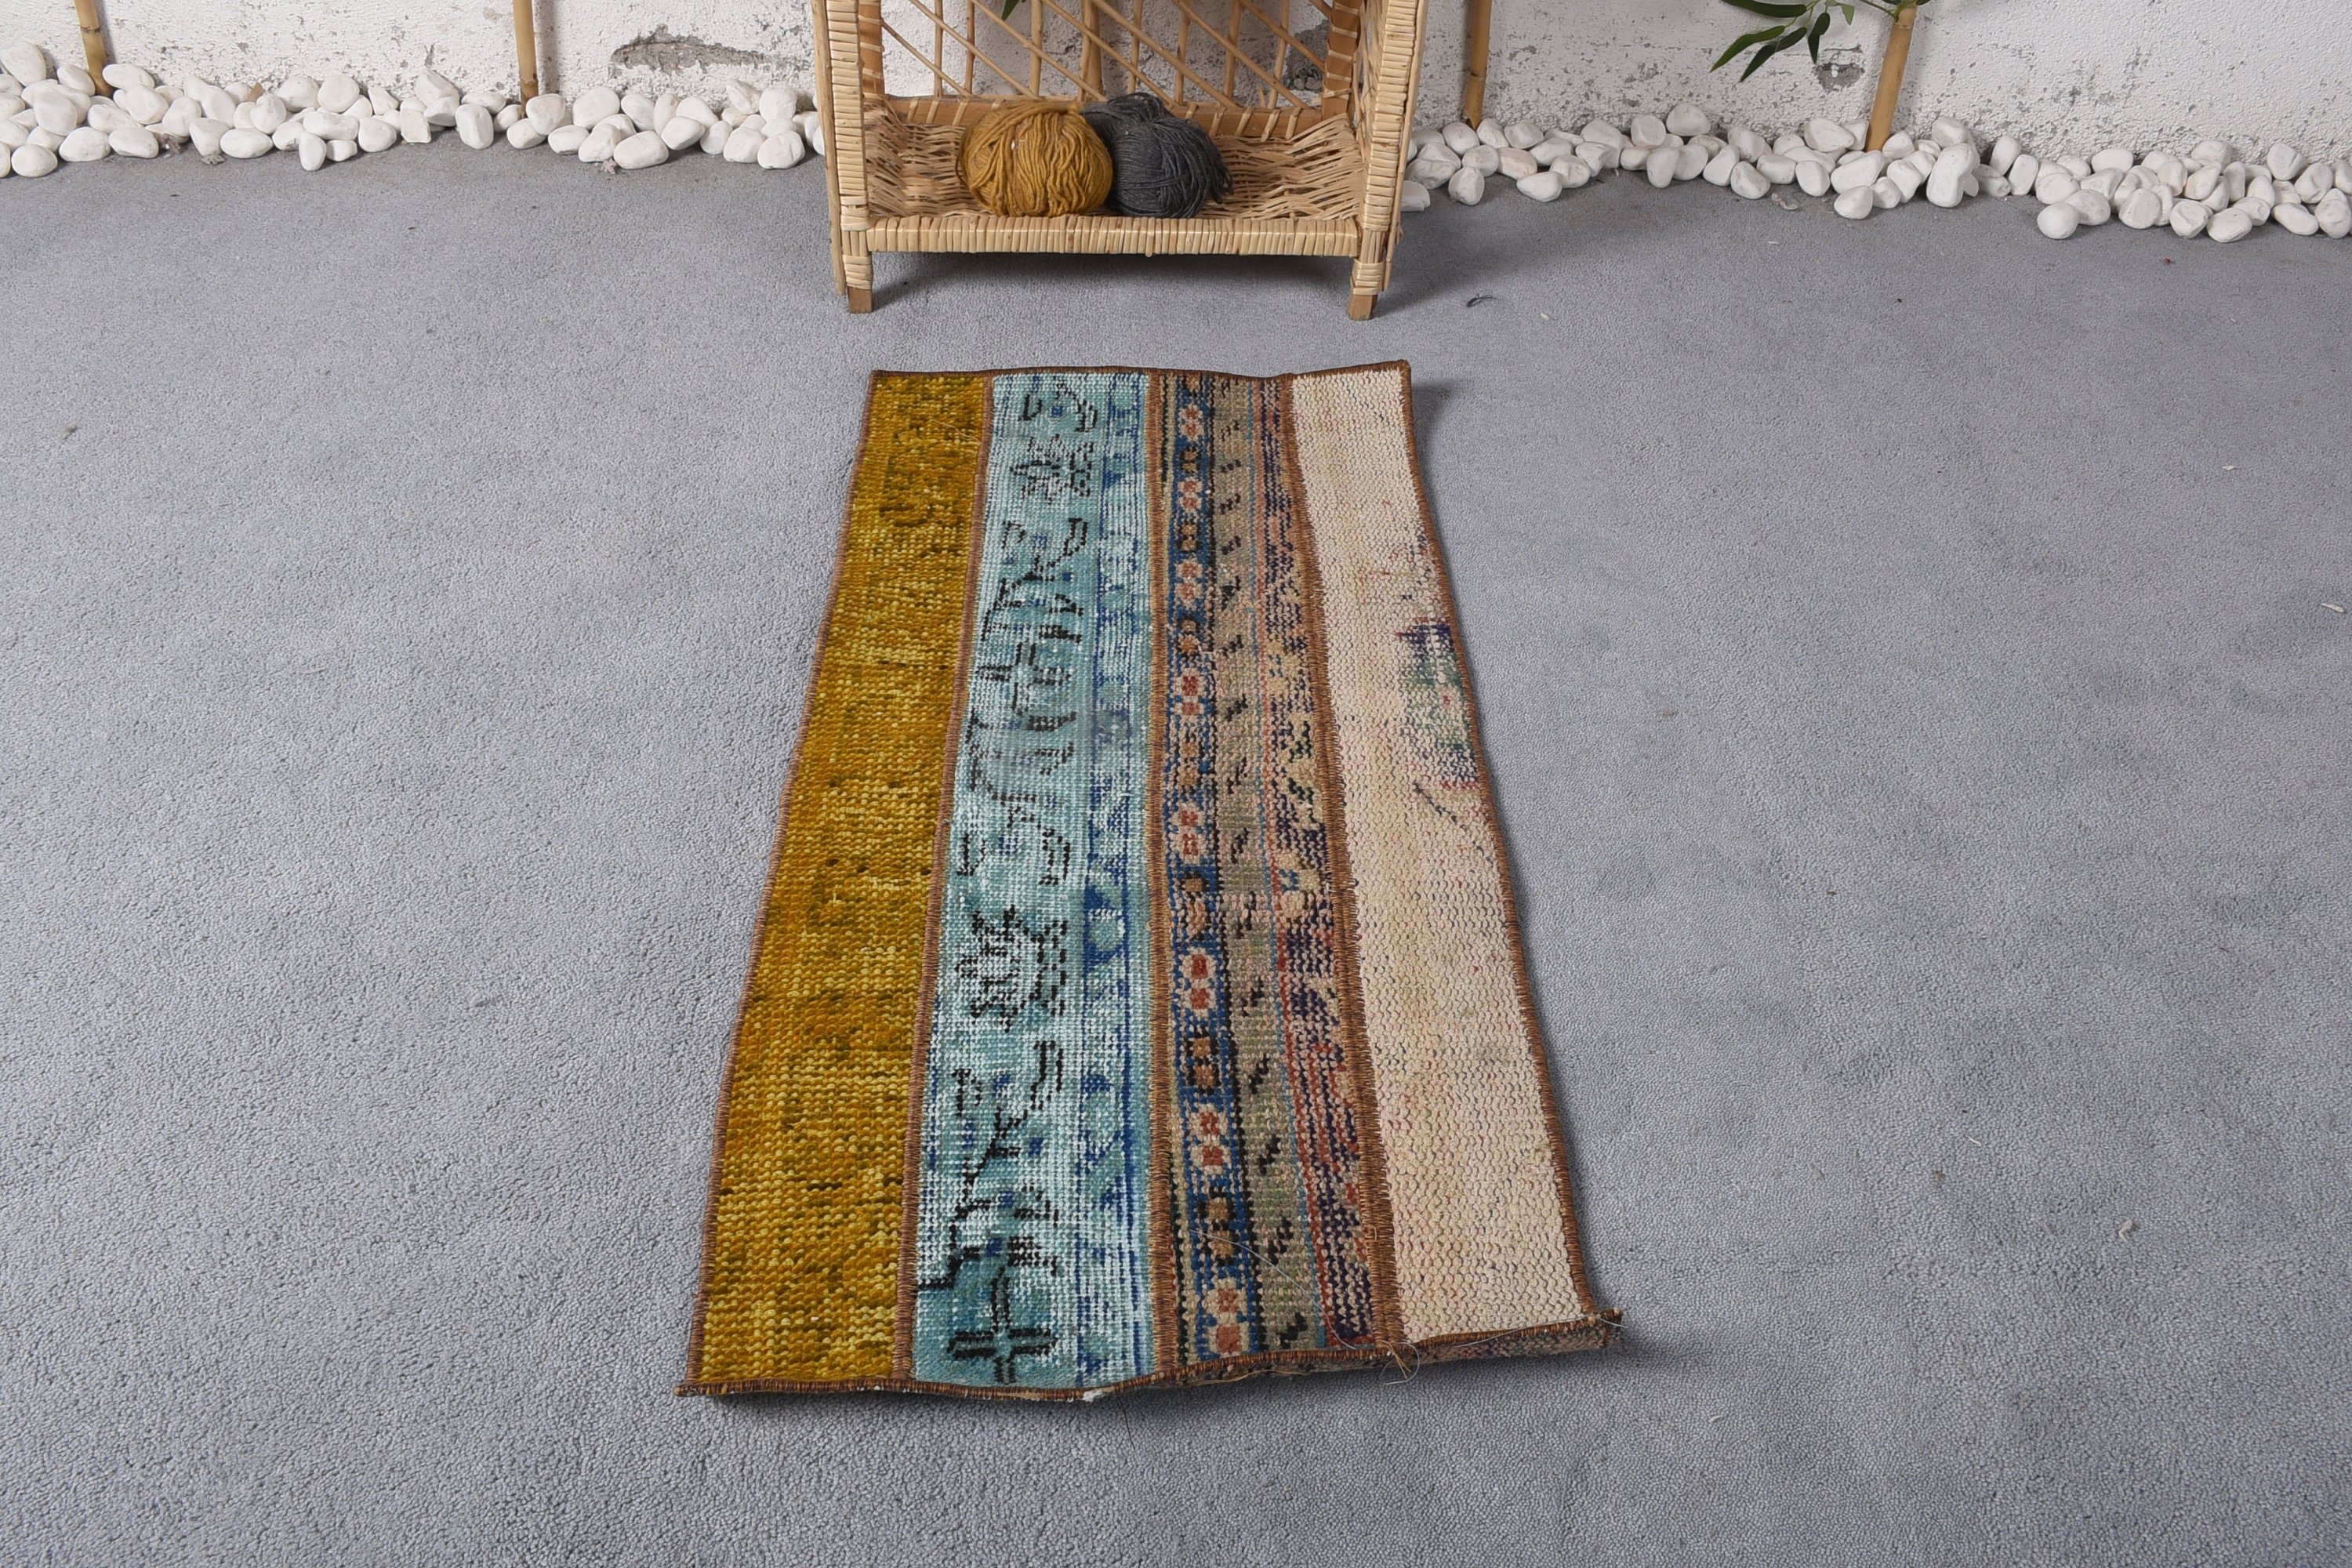 Turkish Rug, Kitchen Rug, Vintage Rugs, Entry Rug, Rugs for Door Mat, 1.5x3.2 ft Small Rug, Wall Hanging Rugs, Blue Wool Rug, Antique Rug